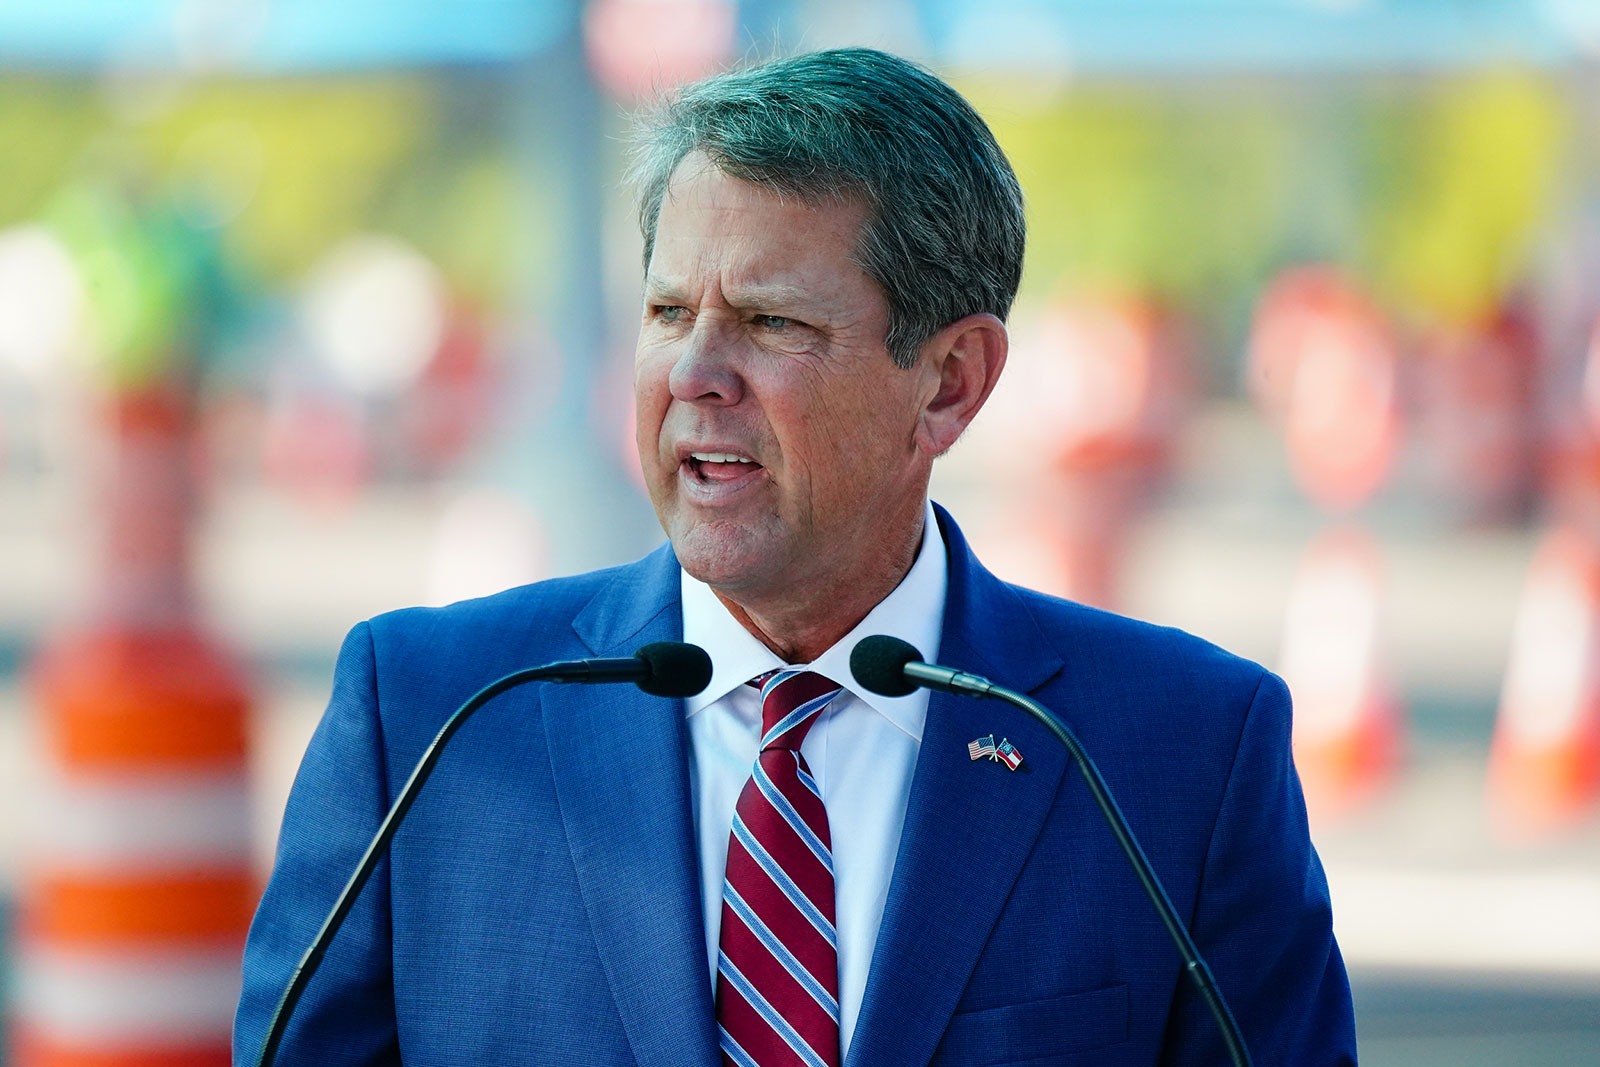 Georgia Gov. Brian Kemp speaks during a press conference in Atlanta on August 10.